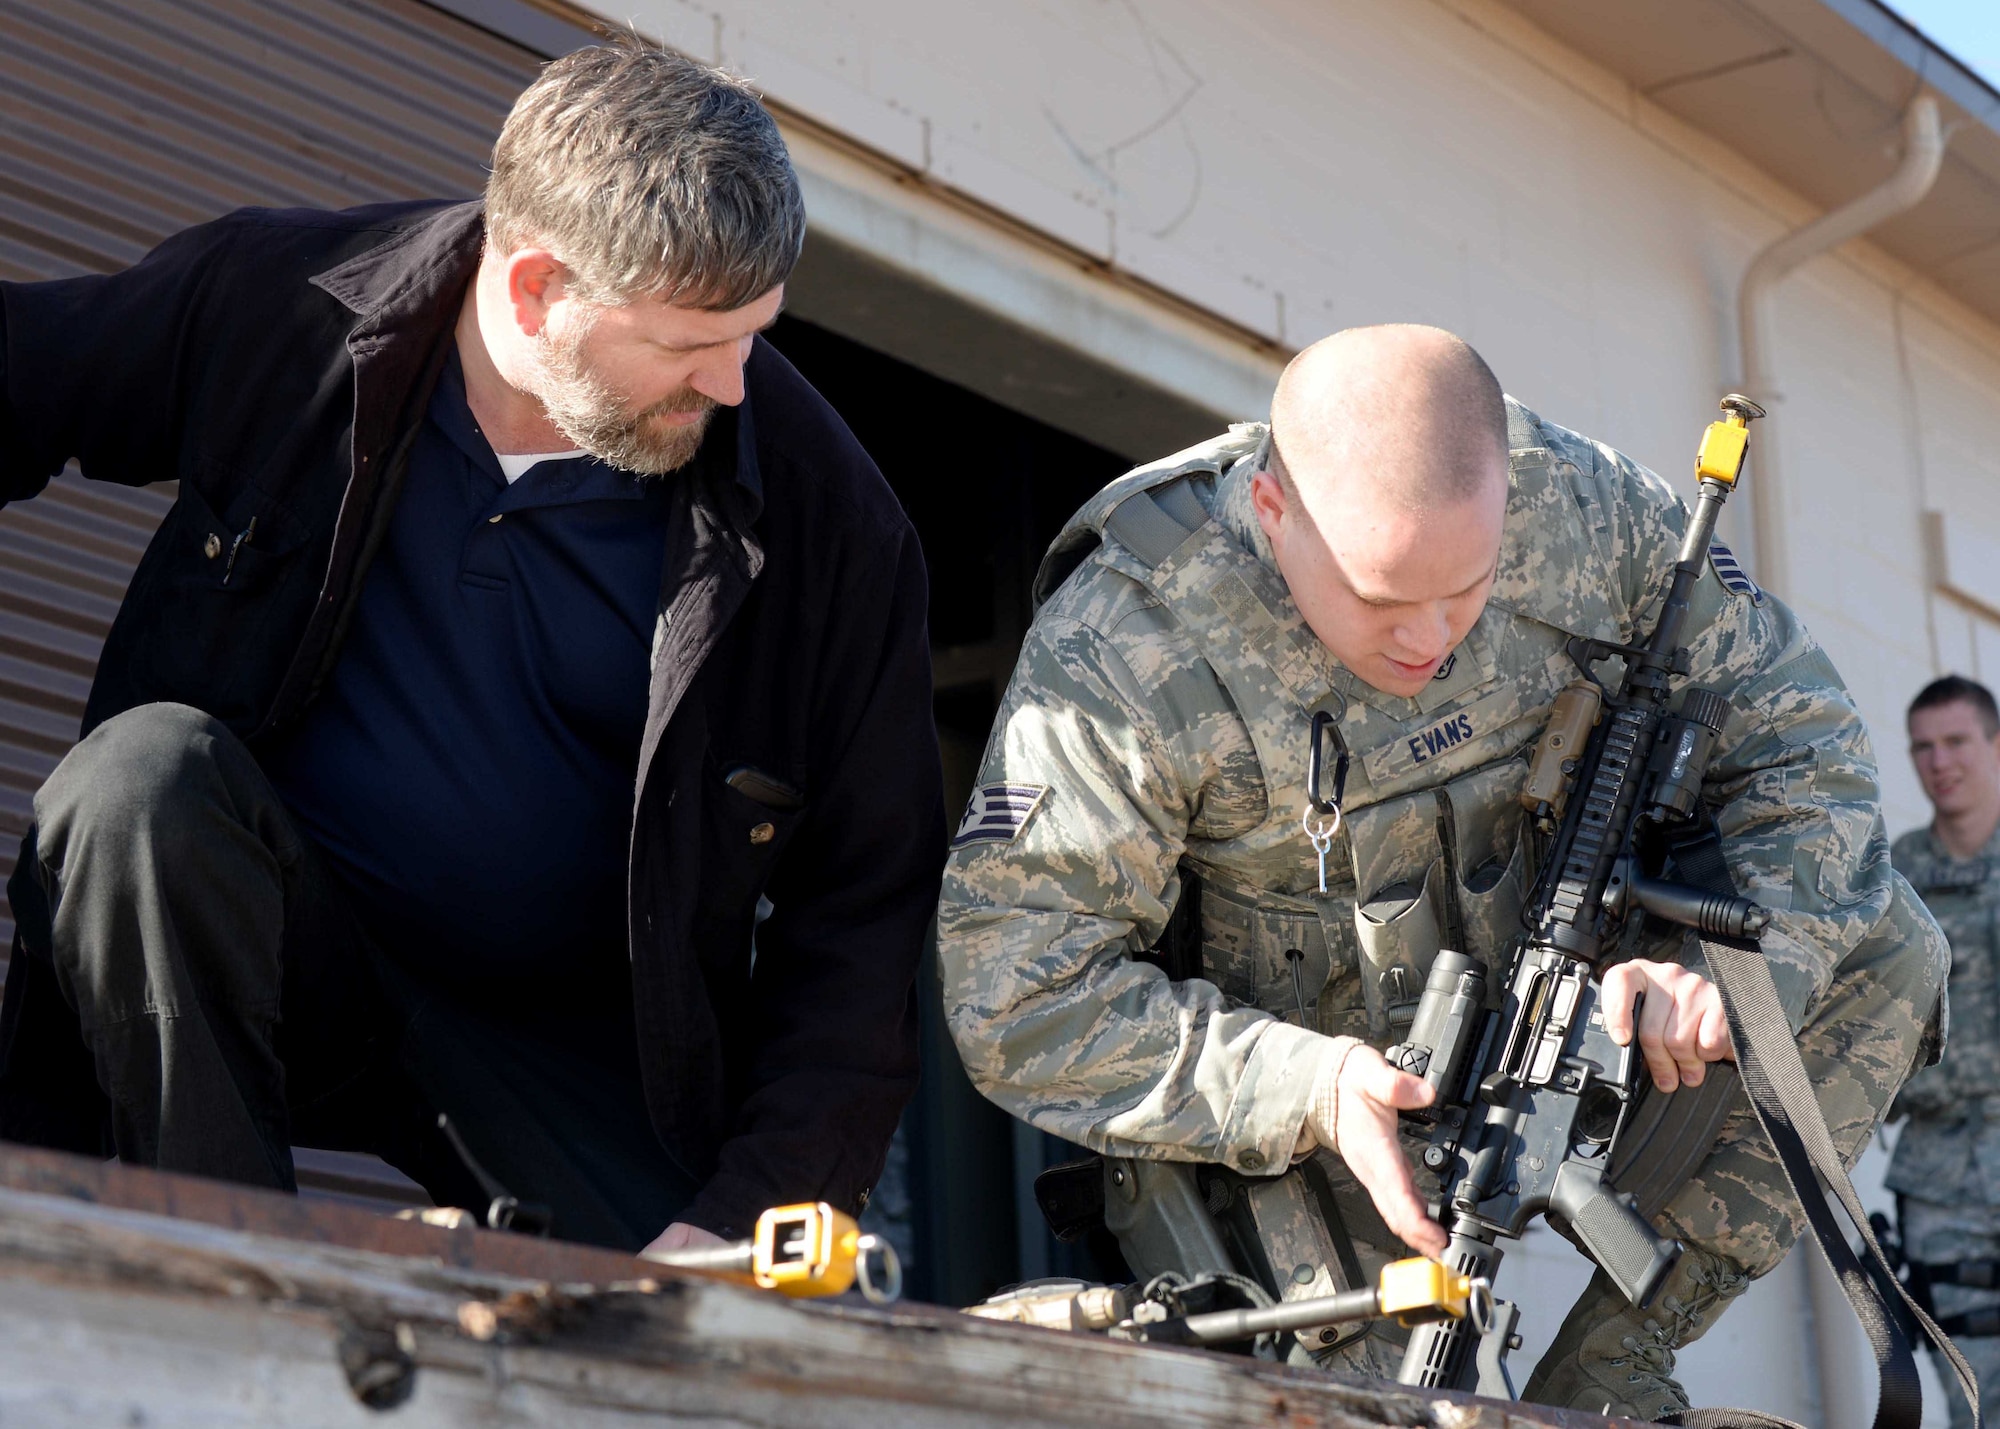 Dion Harris, 28th Security Forces Squadron lead instructor (left), evaluates Staff Sgt. Tylor Evans, 28th SFS response force leader, as he troubleshoots a malfunction in his M4 rifle during a training session at Ellsworth Air Force Base, S.D., March 10, 2015. During the training, Airmen were evaluated on how they dealt with weapon malfunctions under stress. (U.S. Air Force photo by Airman 1st Class Rebecca Imwalle/Released)